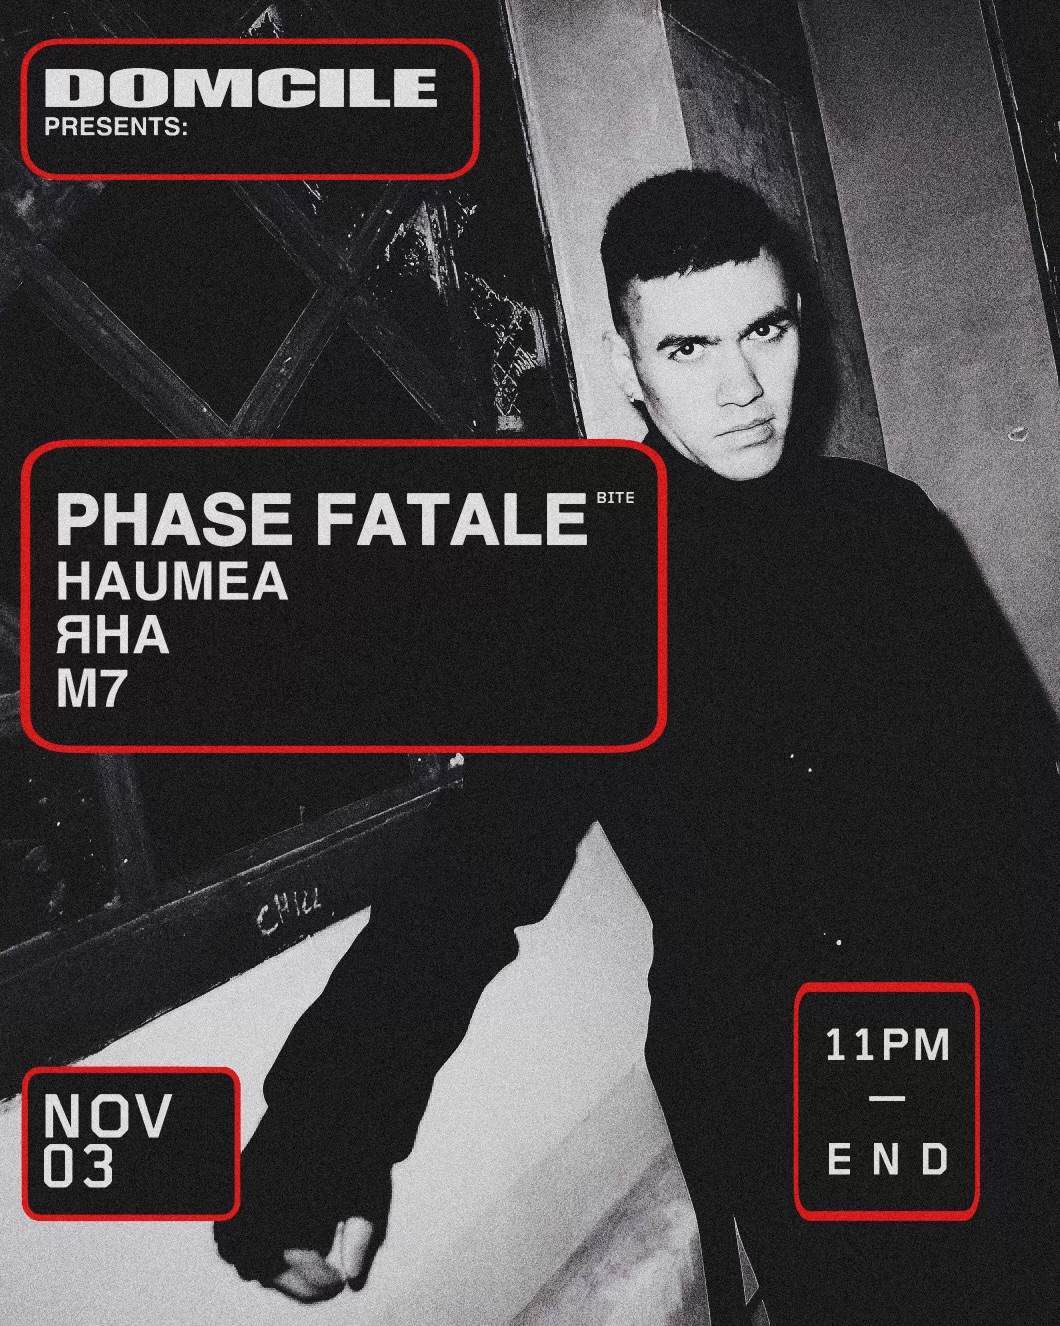 Phase Fatale - Página frontal